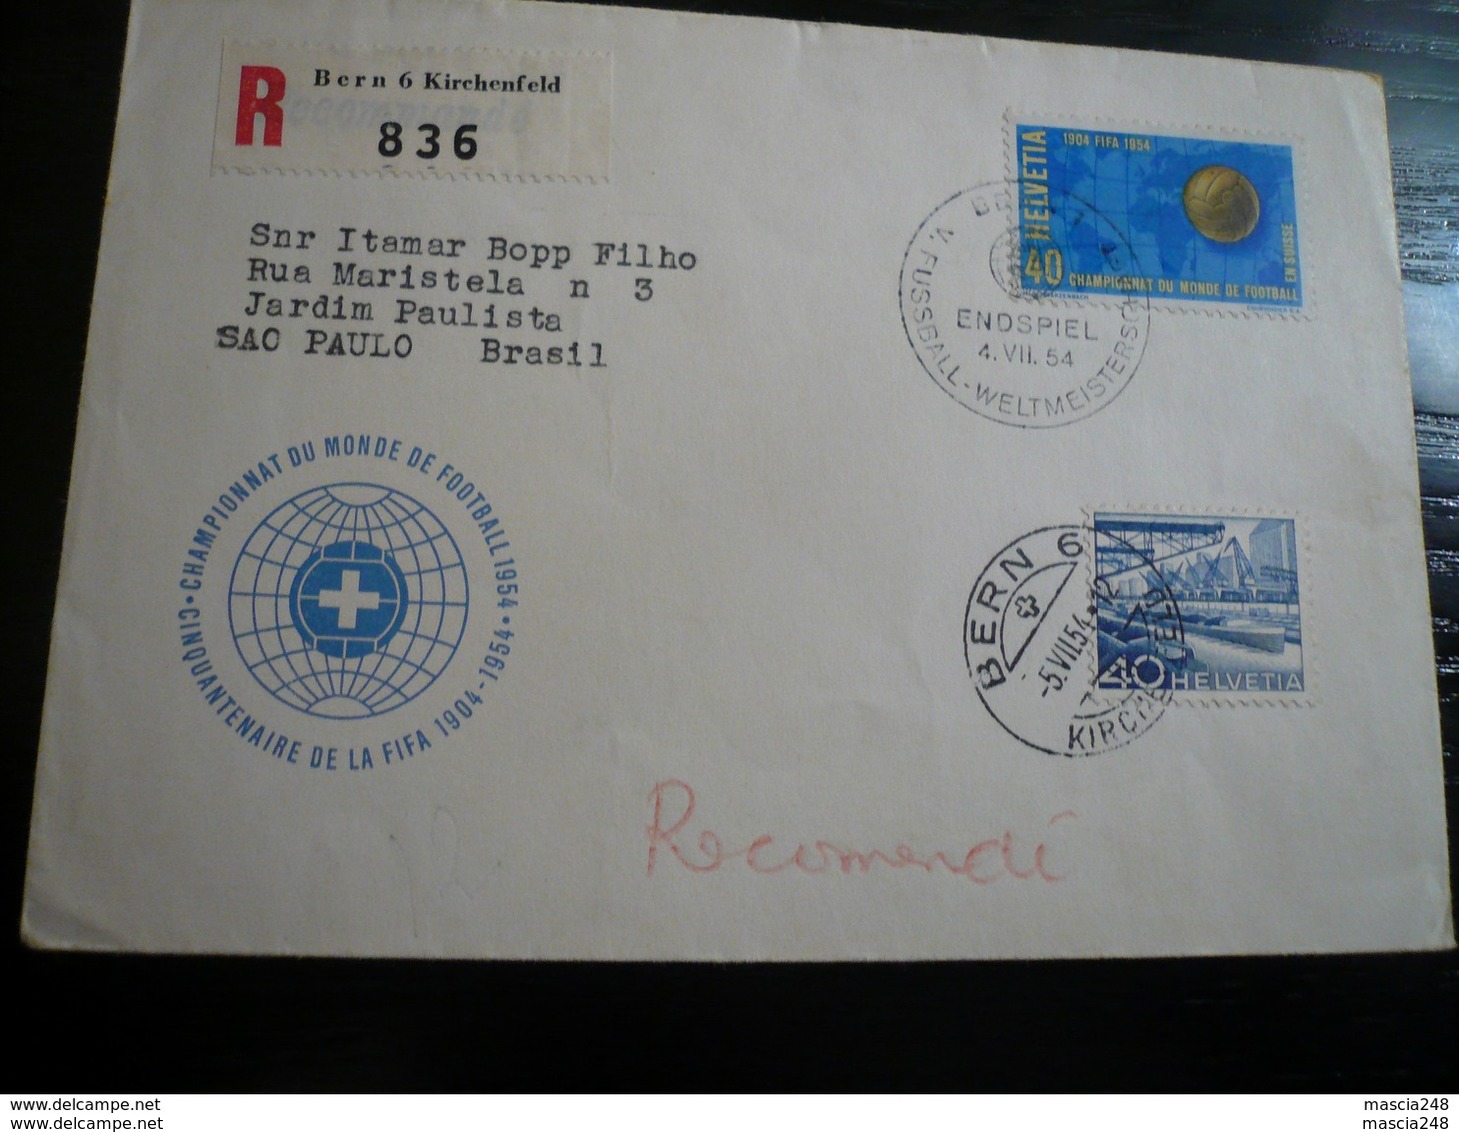 Calcio Soccer  1954 World Cup Registered Letter With Date 04.07.1954 Then Shipped To Brasil - 1954 – Switzerland